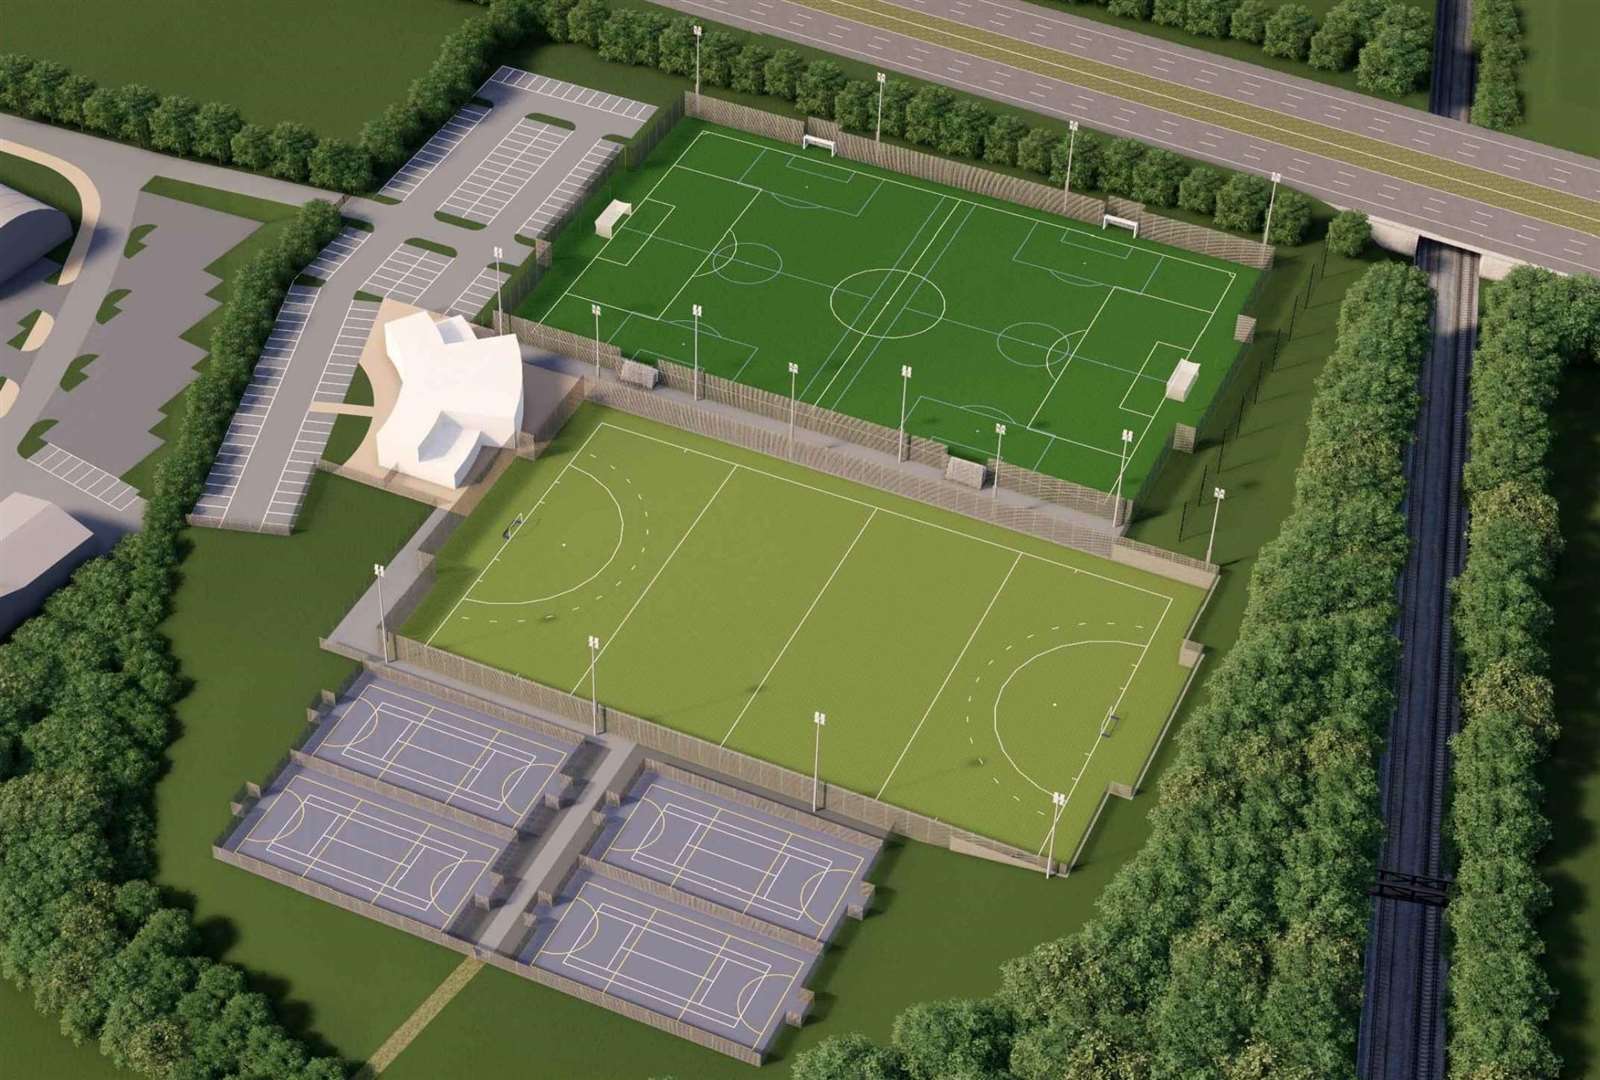 The scheme will include a number of new pitches, floodlighting and a large car park. (5888653)